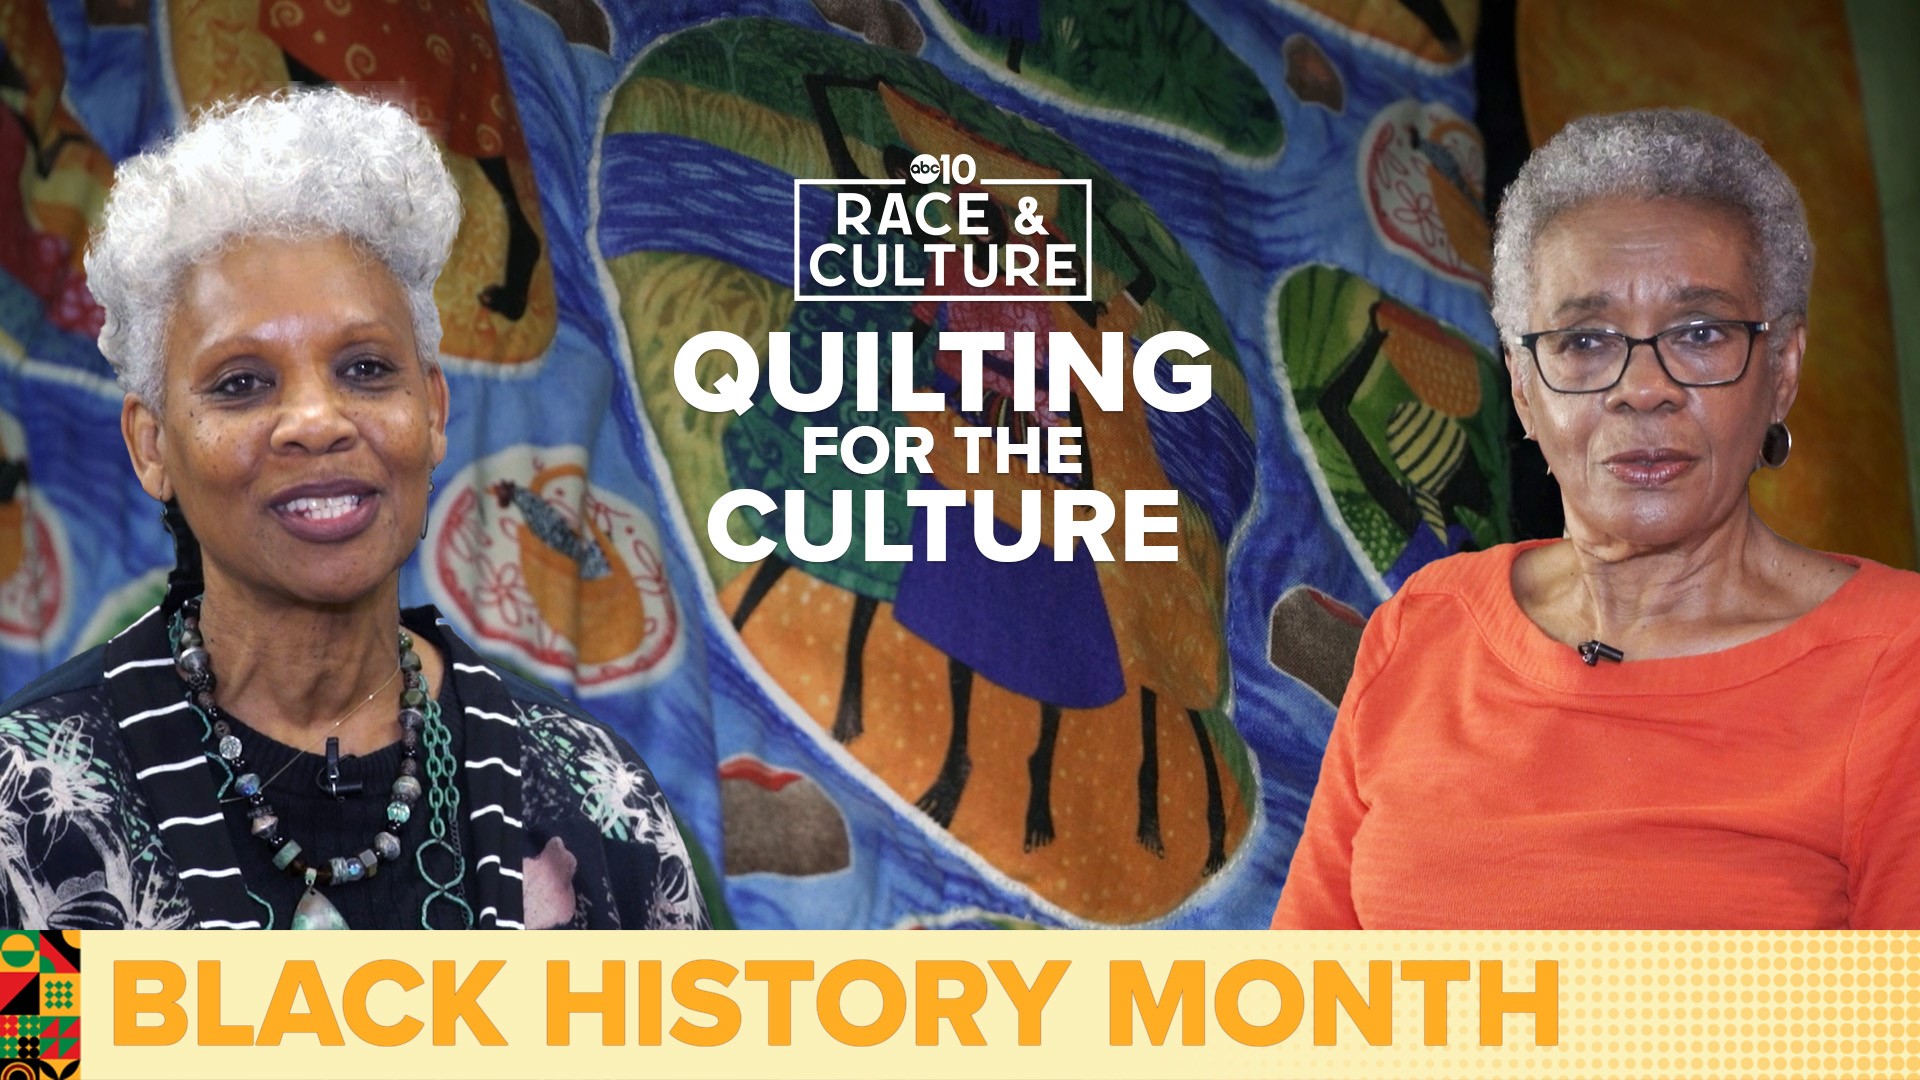 'People who would not ordinarily find the information in a book may find it expressed in a quilt,' said Roxie Mason with Sisters Quilting Collective.